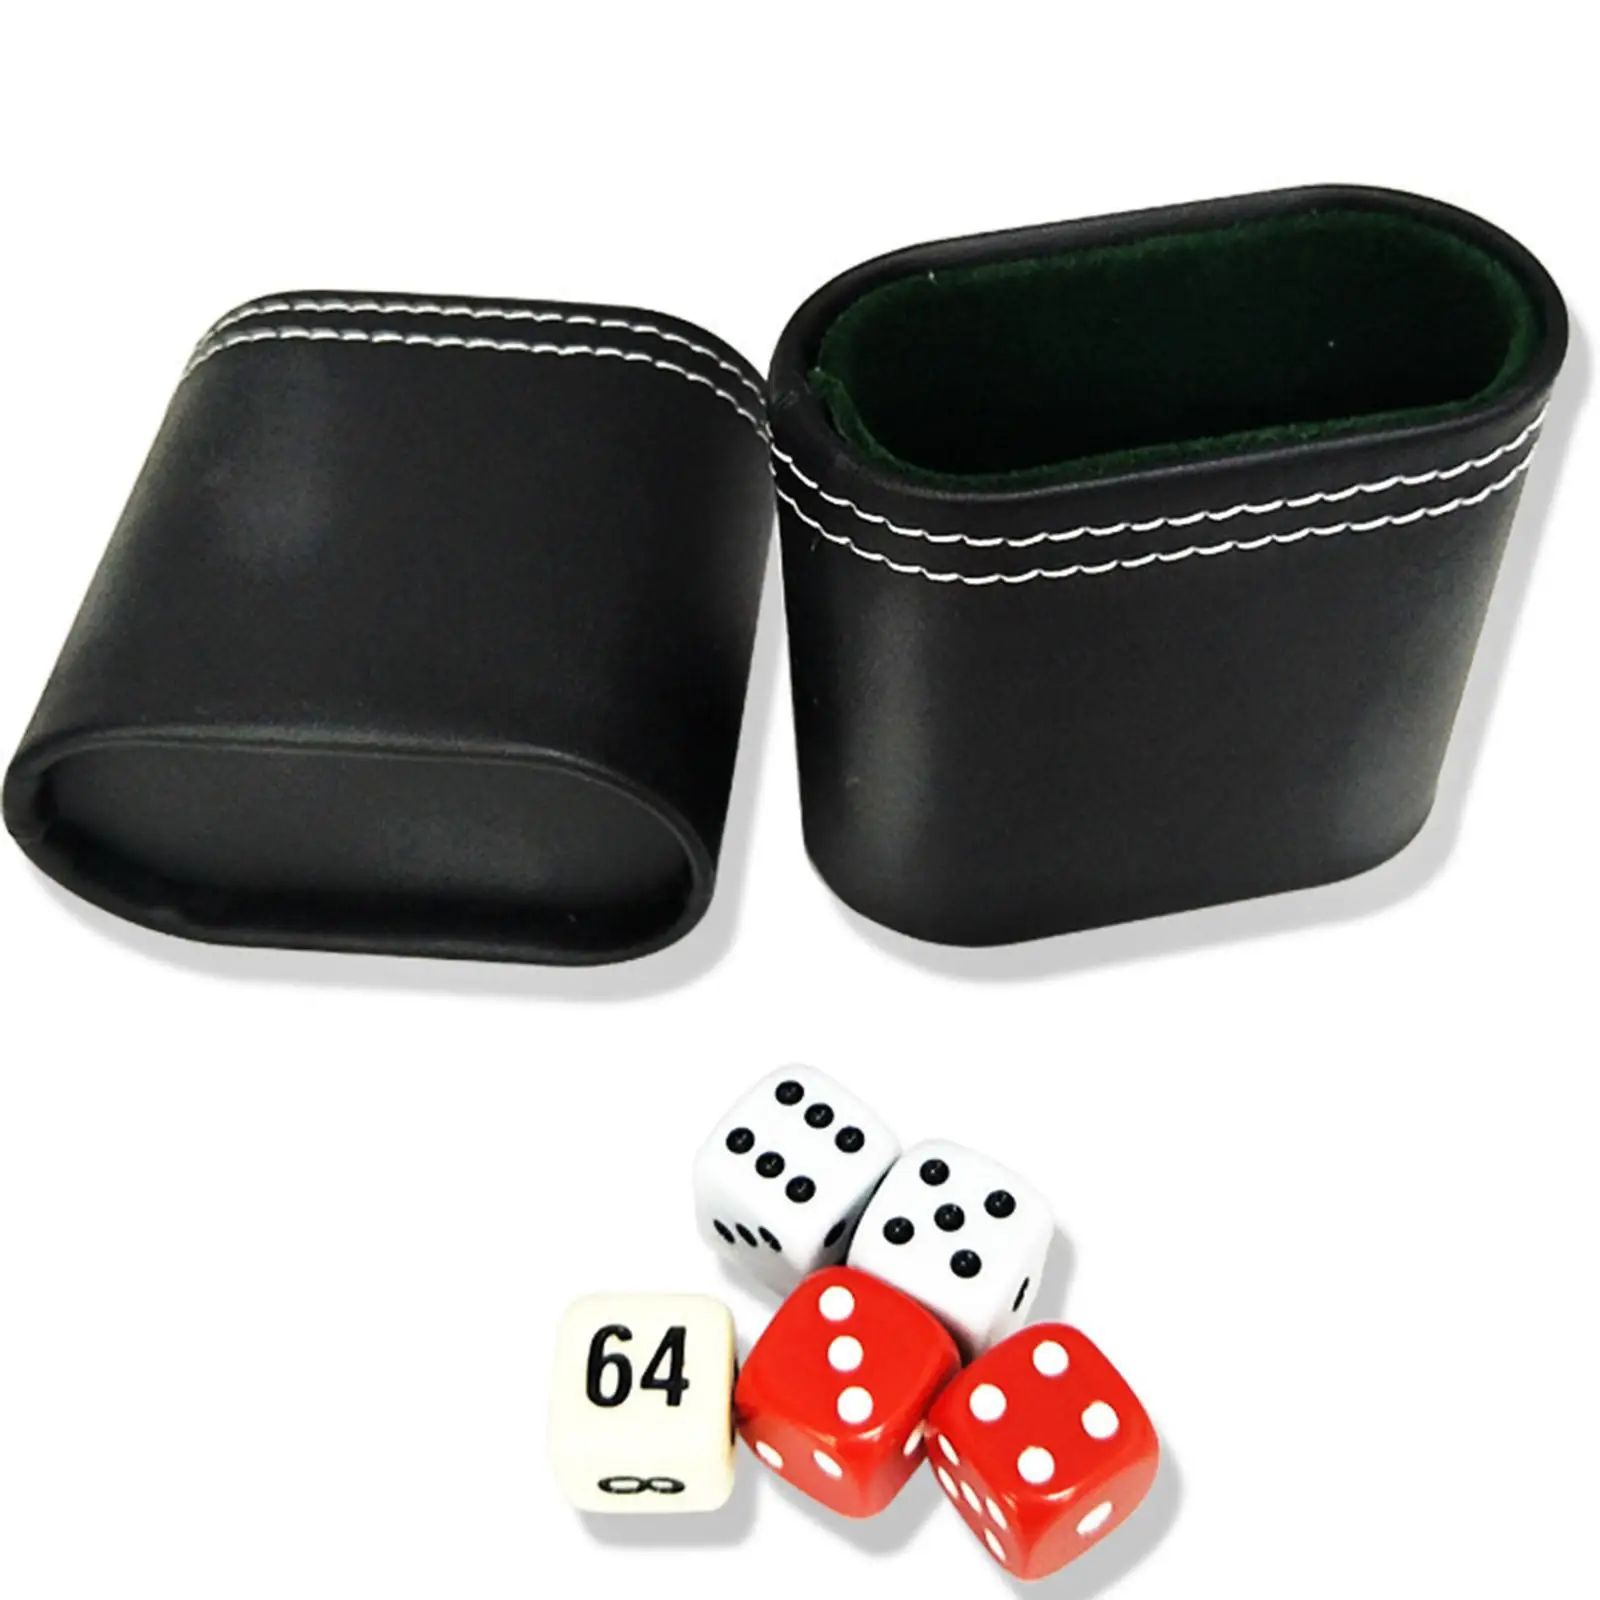 Professional Dices Cups PU Leather Manual Dices Cup Dices Box Entertainment Accessories for DND RPG Table Board Games Party Bar